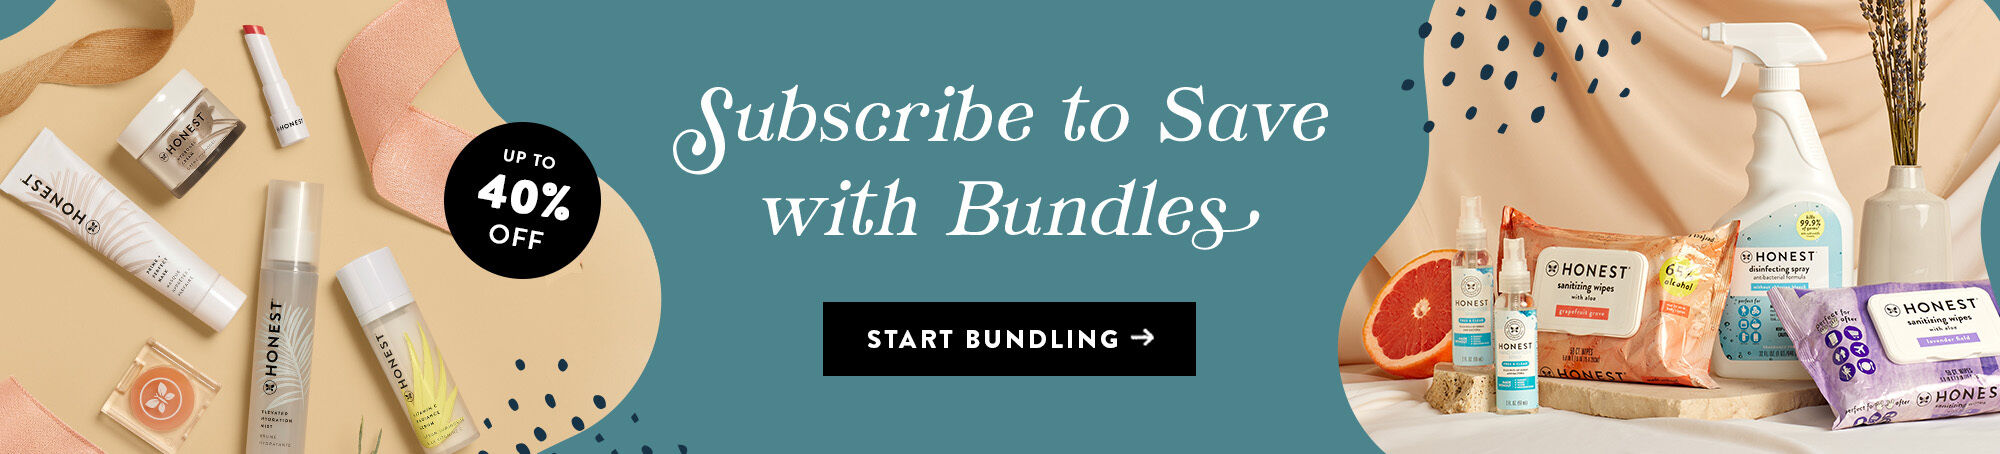 Subscribe to save with bundles